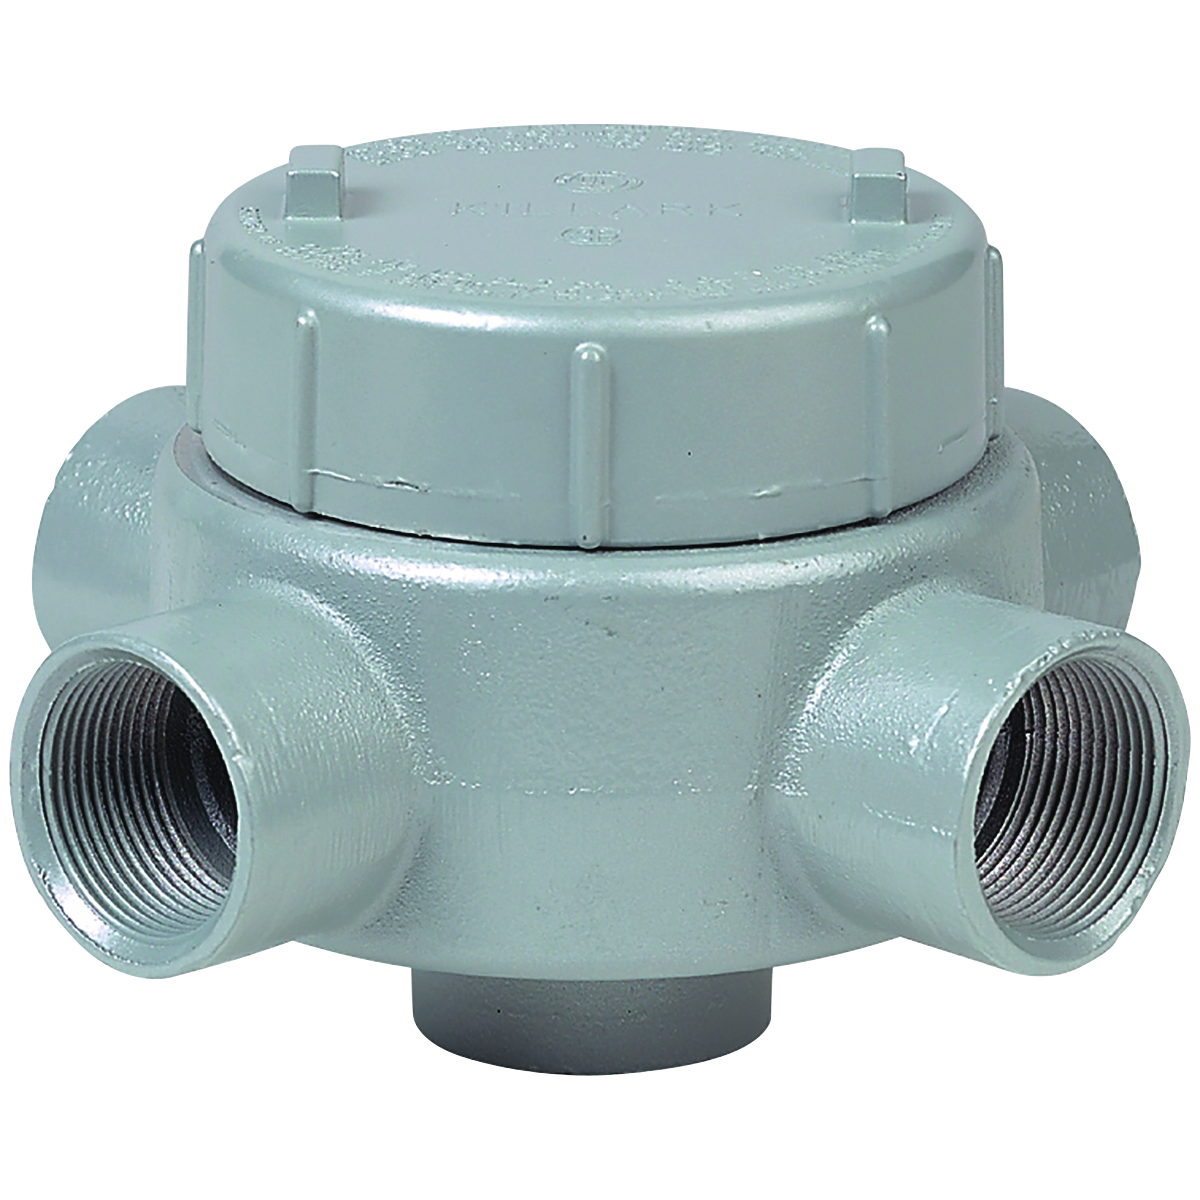 GES SERIES FITTINGS - IRON - XAT TYPE OUTLET BODY - HUB SIZE 1-1/4 IN -VOLUME 42.0 CU IN